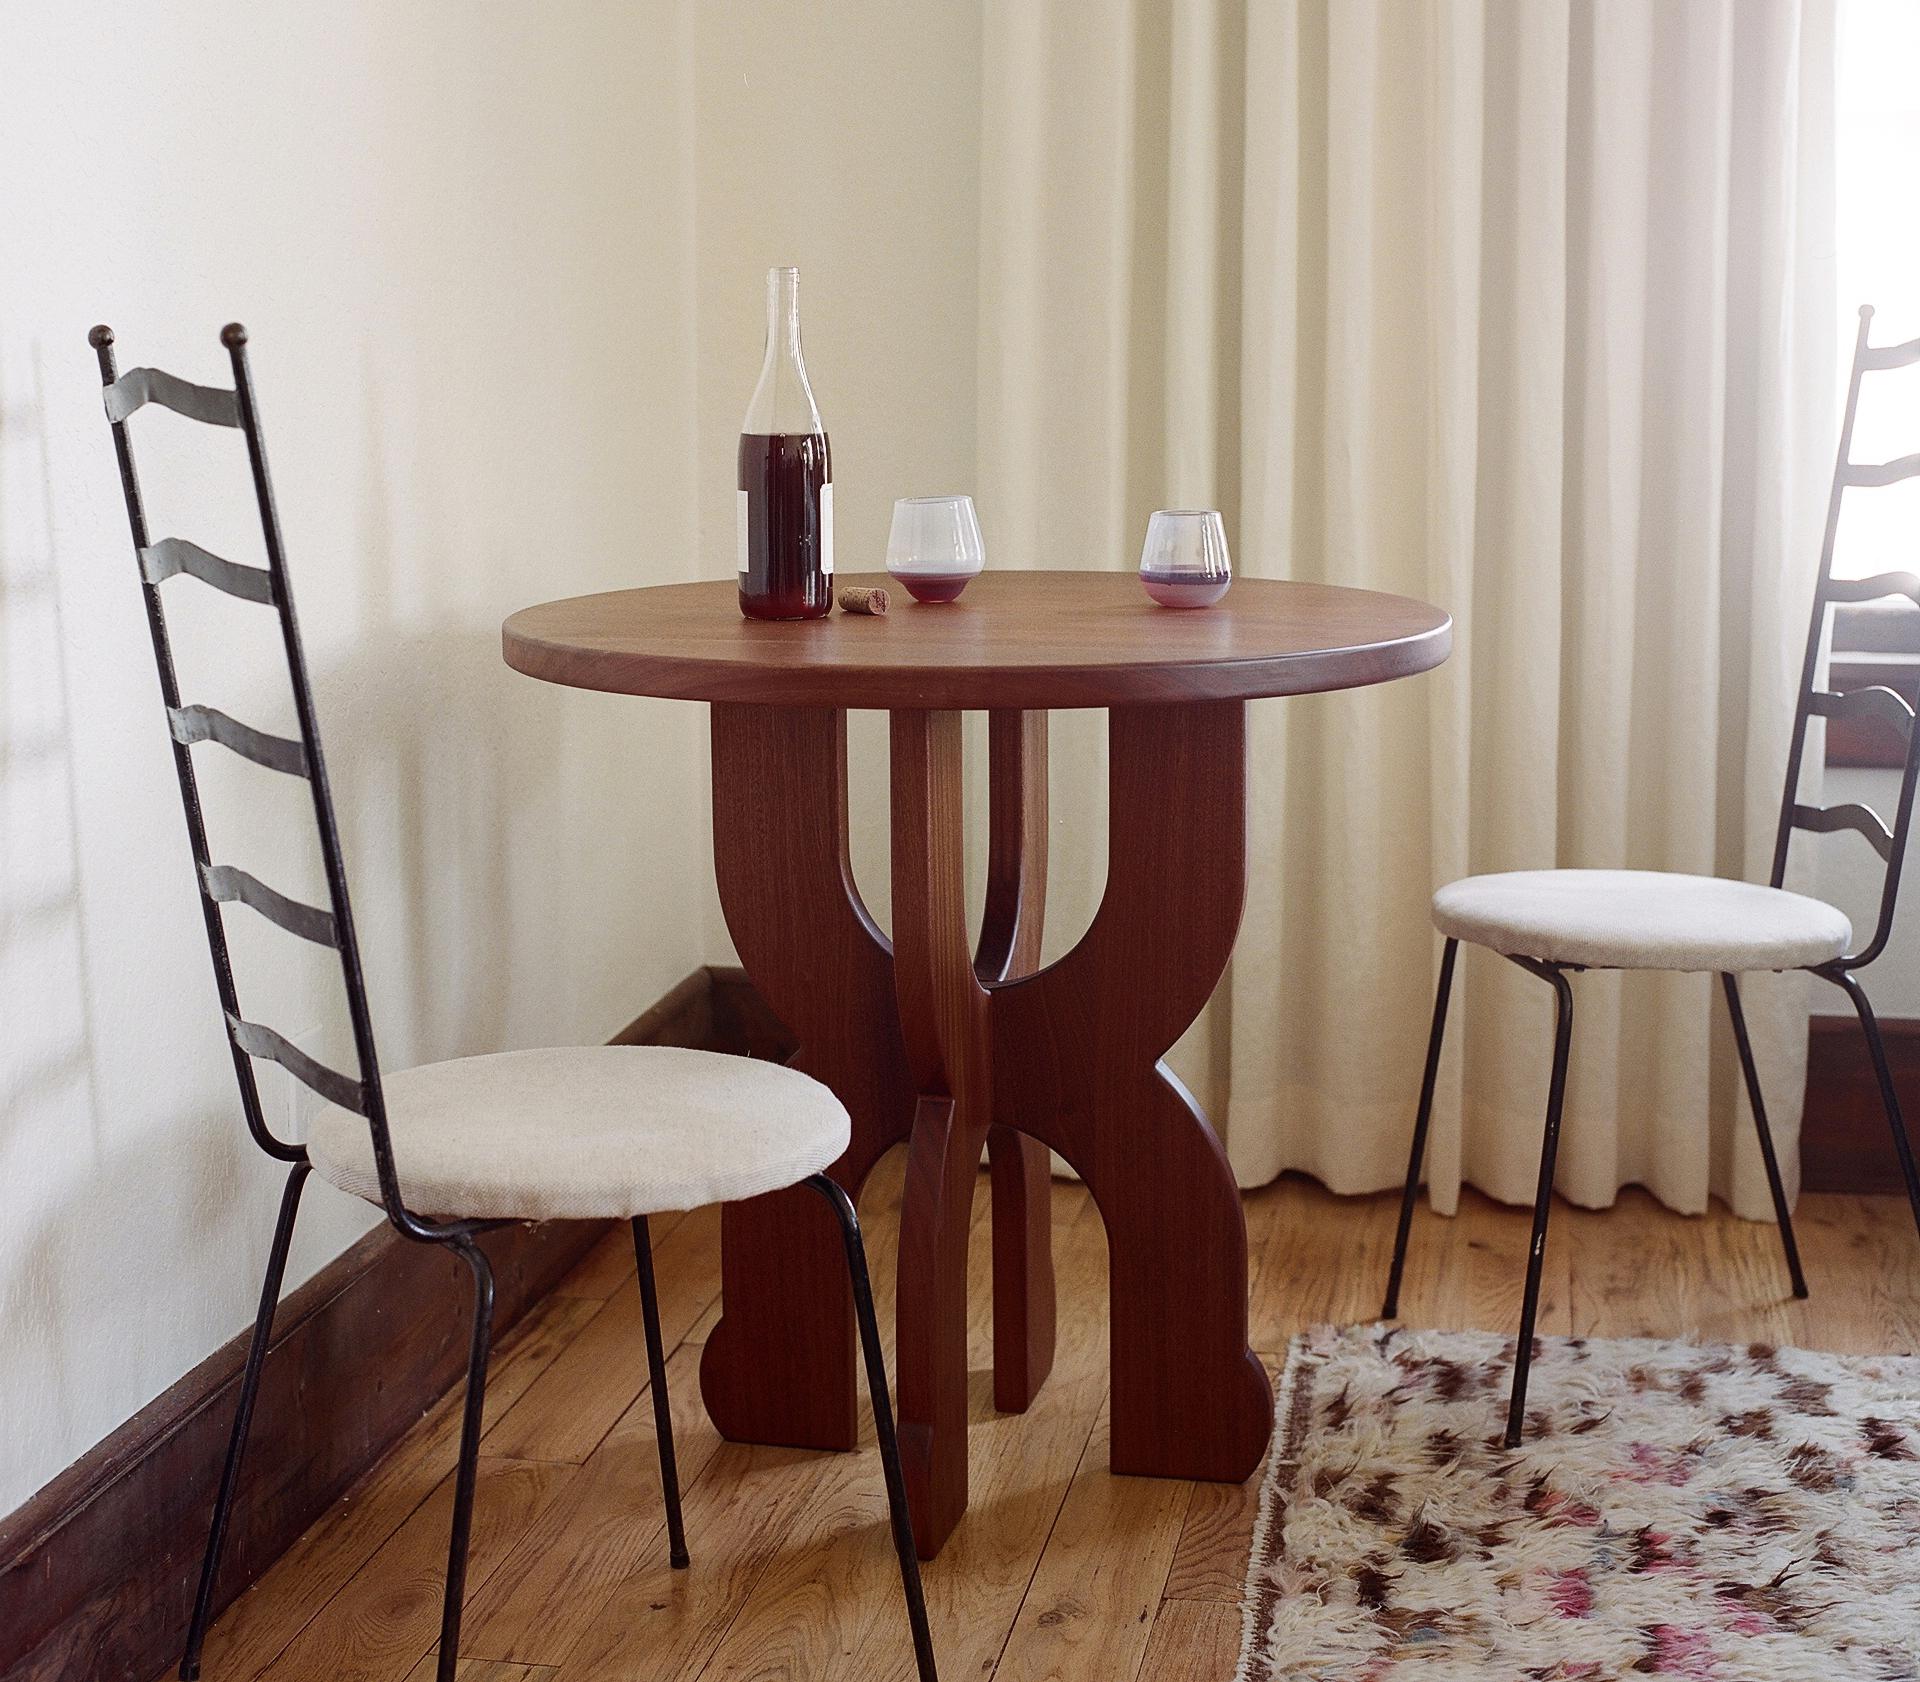 With soft curves and a playful silhouette, the petite Table Wine Table is a perfect spot to sit and drink a glass of wine. Its versatility lends itself to use as an entry table or an oversized sofa side table. The table is available in custom sizes;